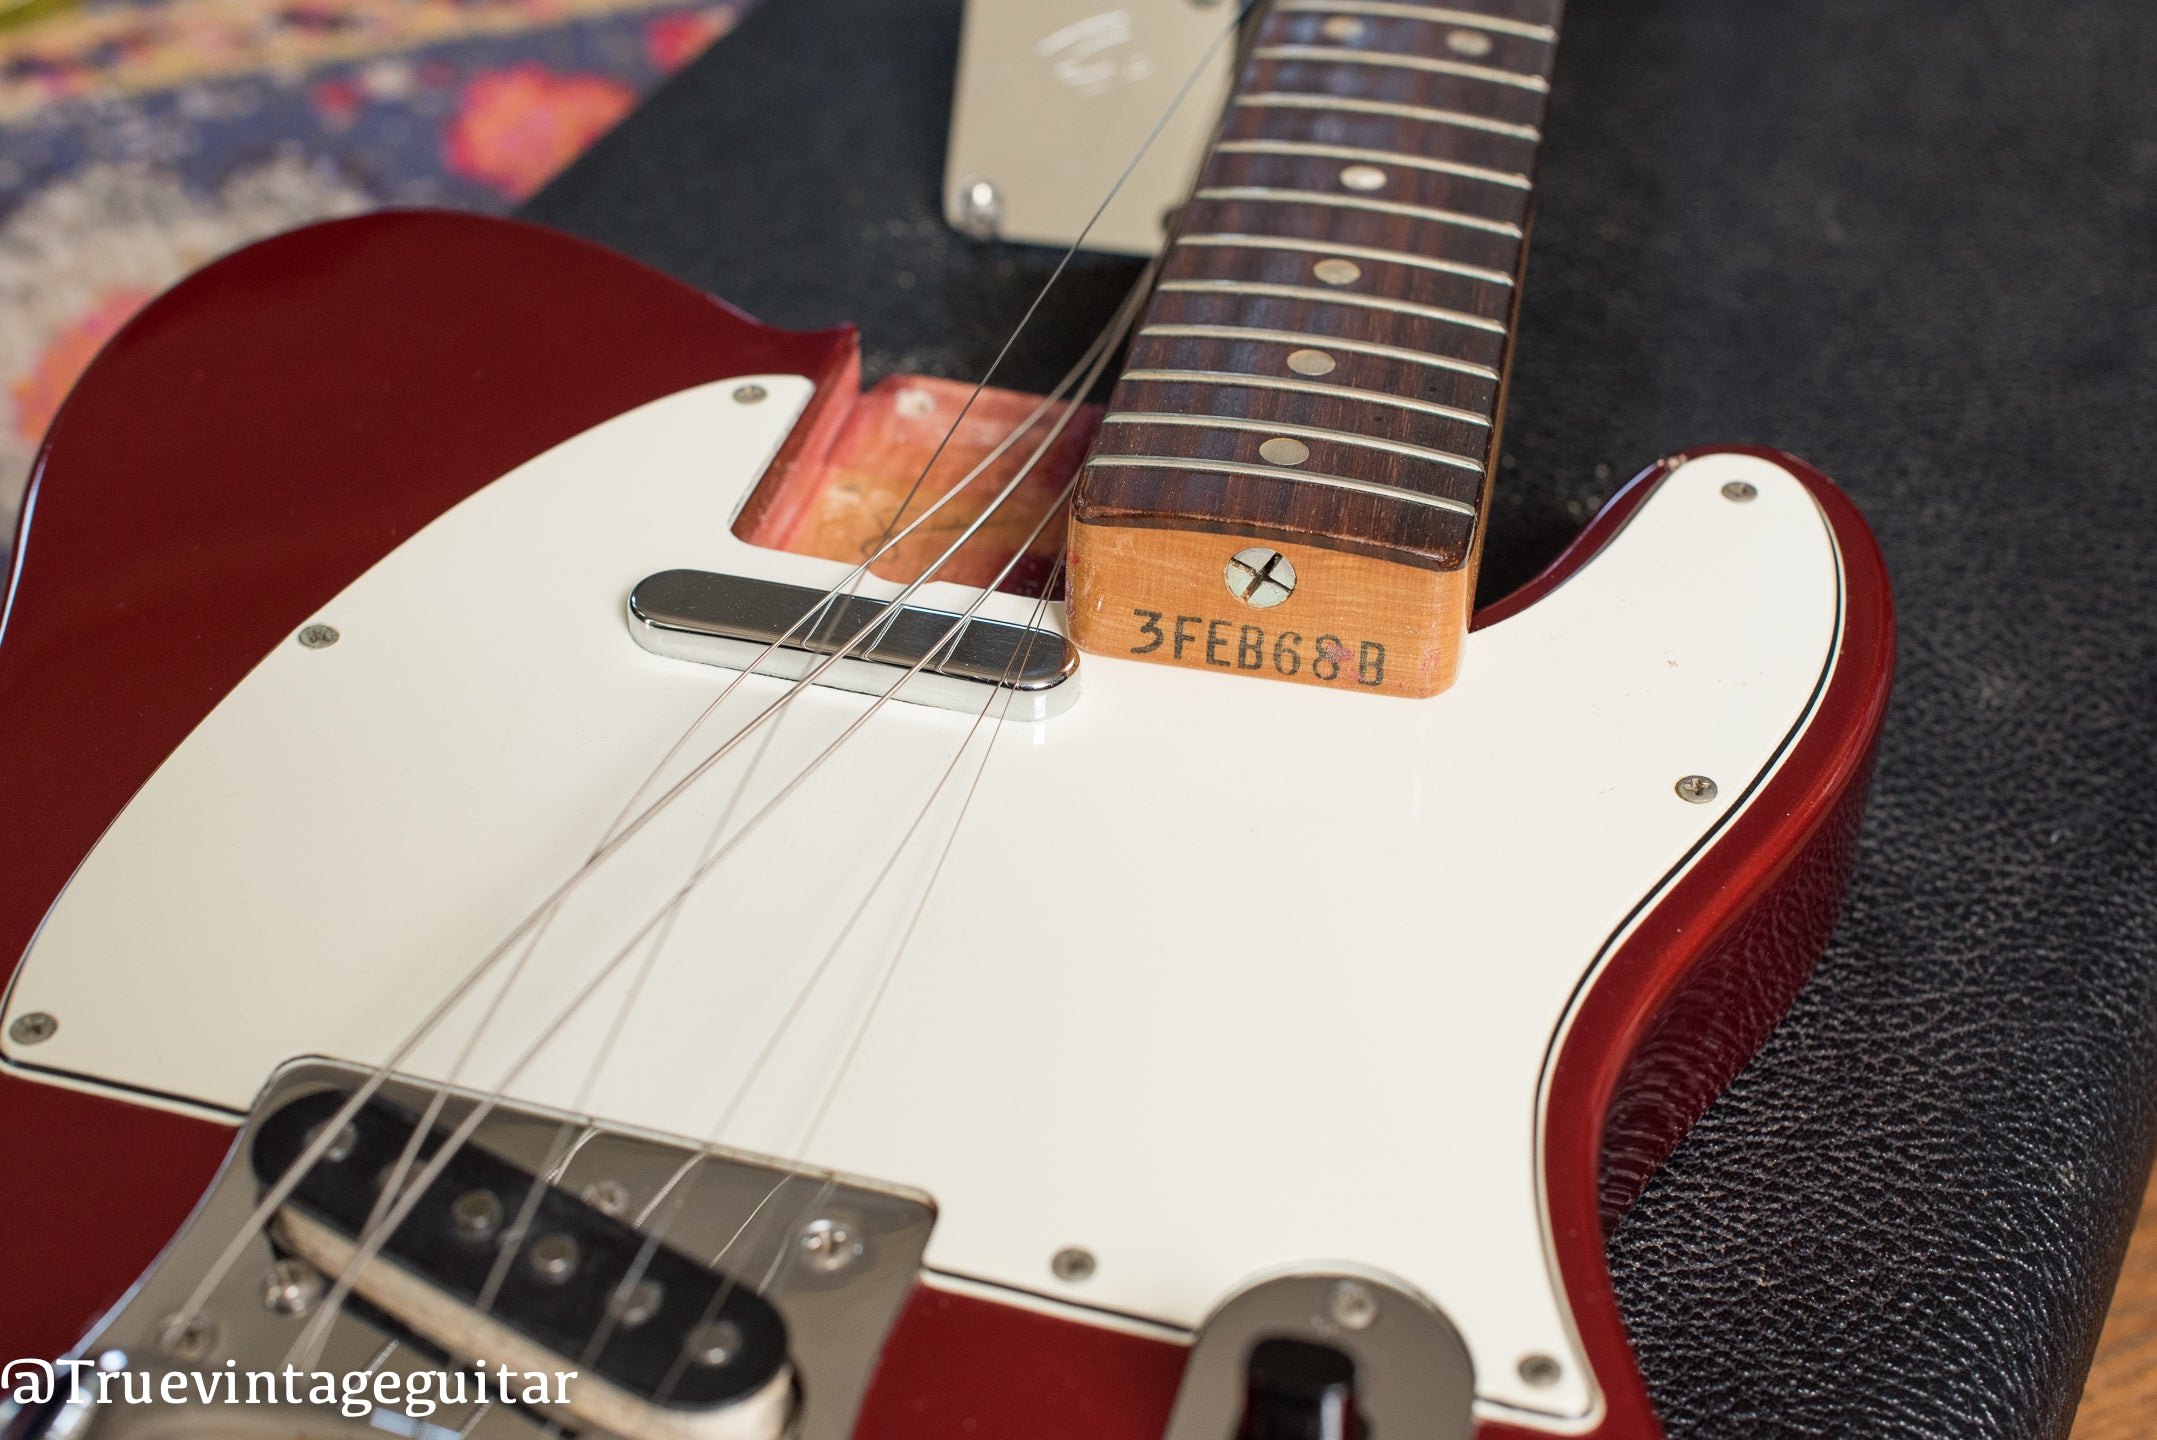 Neck stamp, date stamp, "3FEB68B", Vintage 1968 Fender Telecaster Candy Apple Red Metallic Bigsby electric guitar